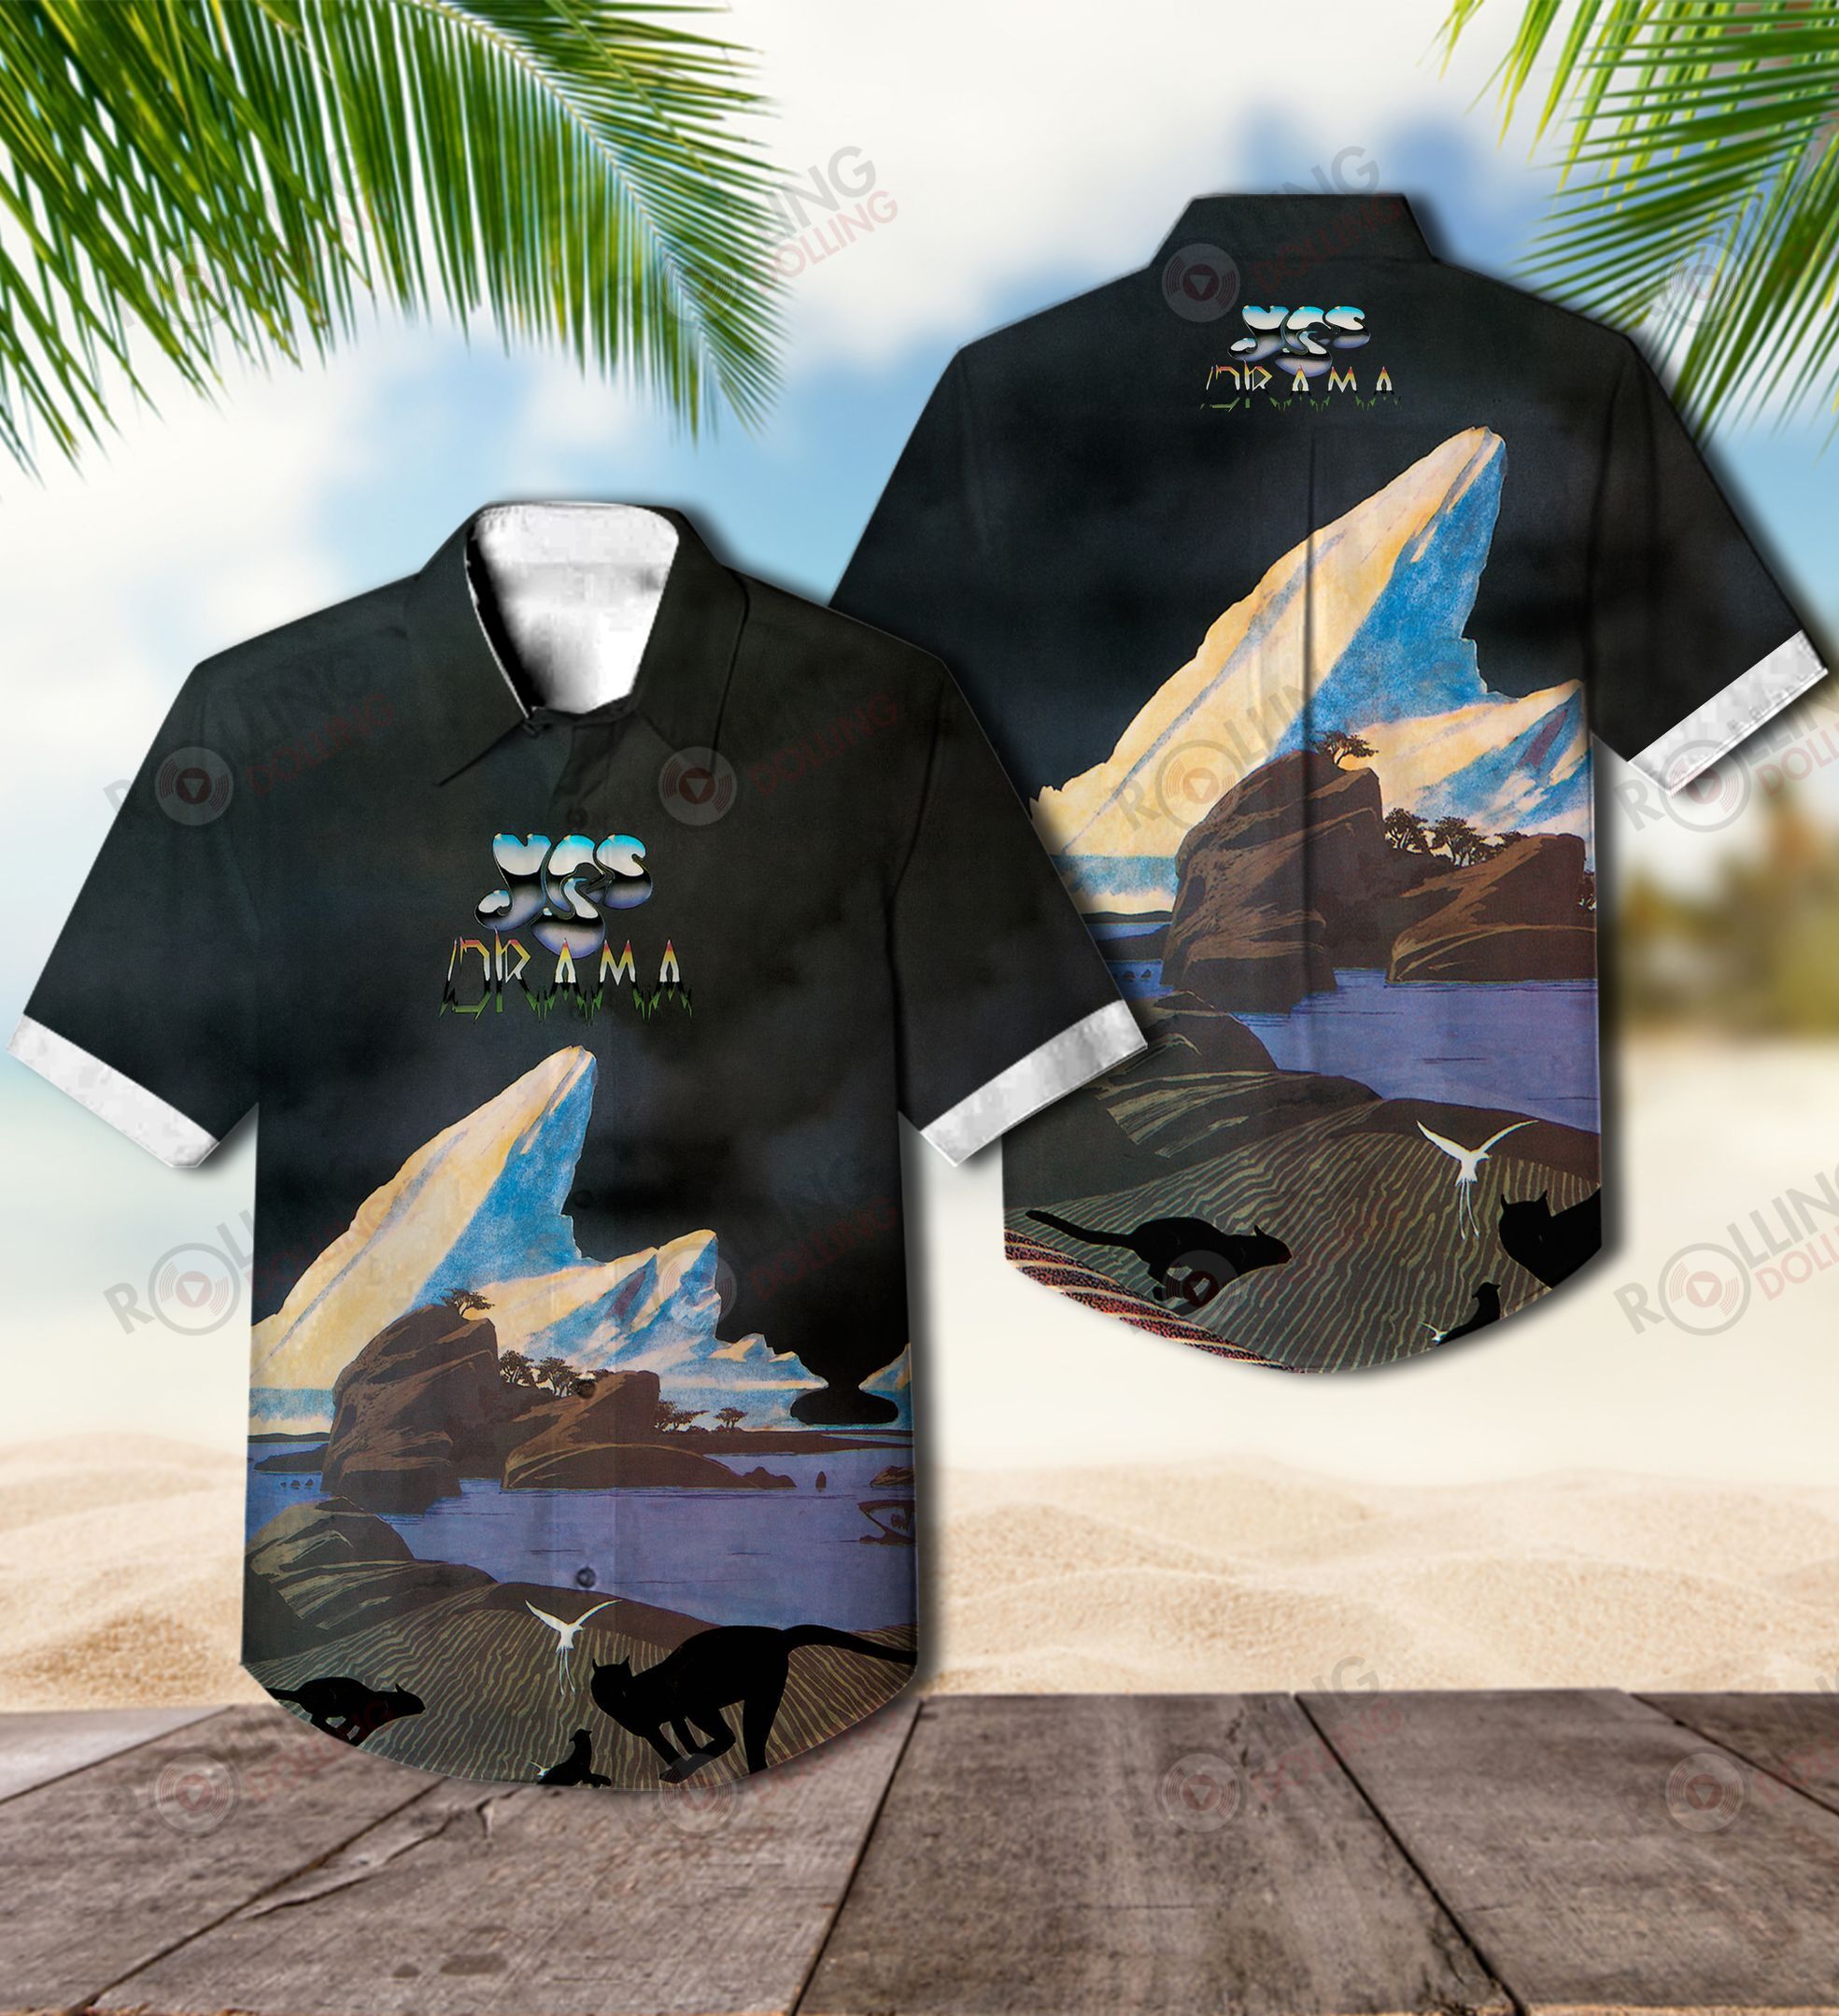 The Hawaiian Shirt is a popular shirt that is worn by Rock band fans 59